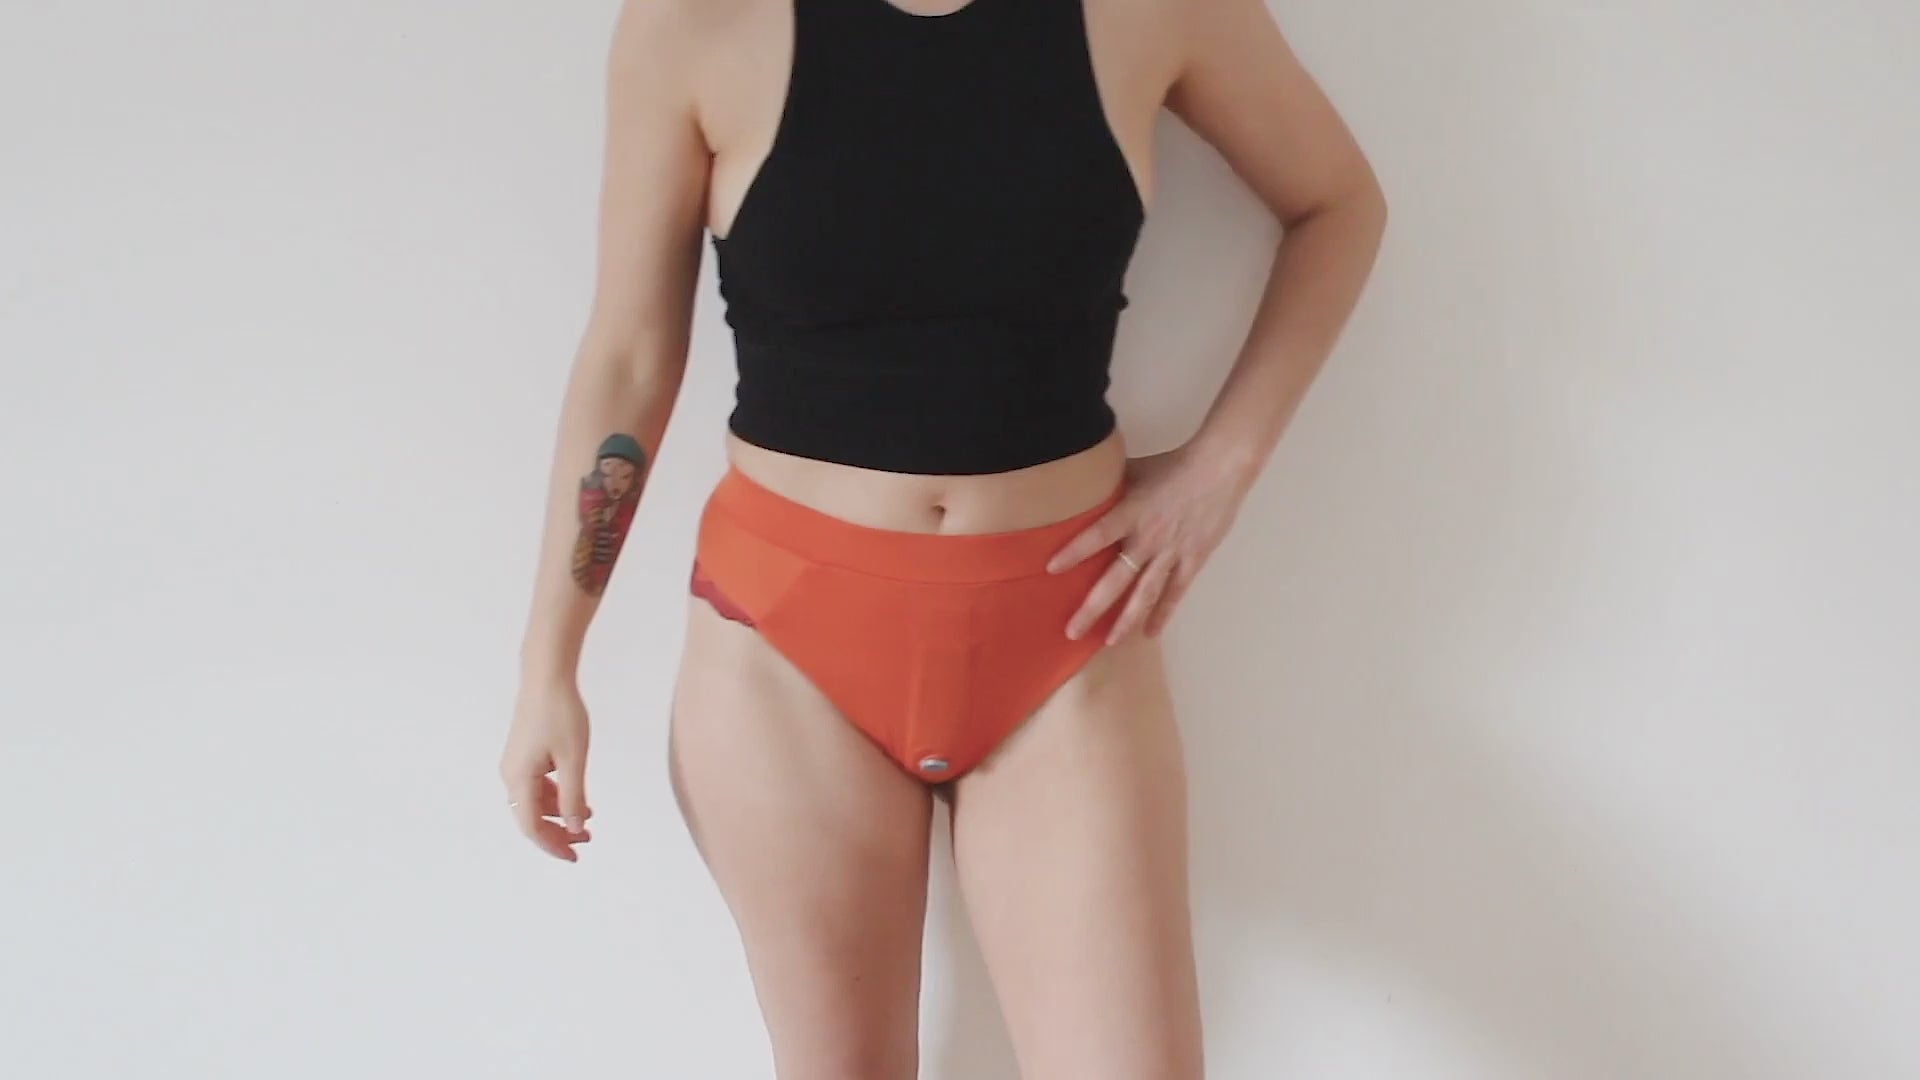 video showing a girl wearing an orange classic lingerie harness